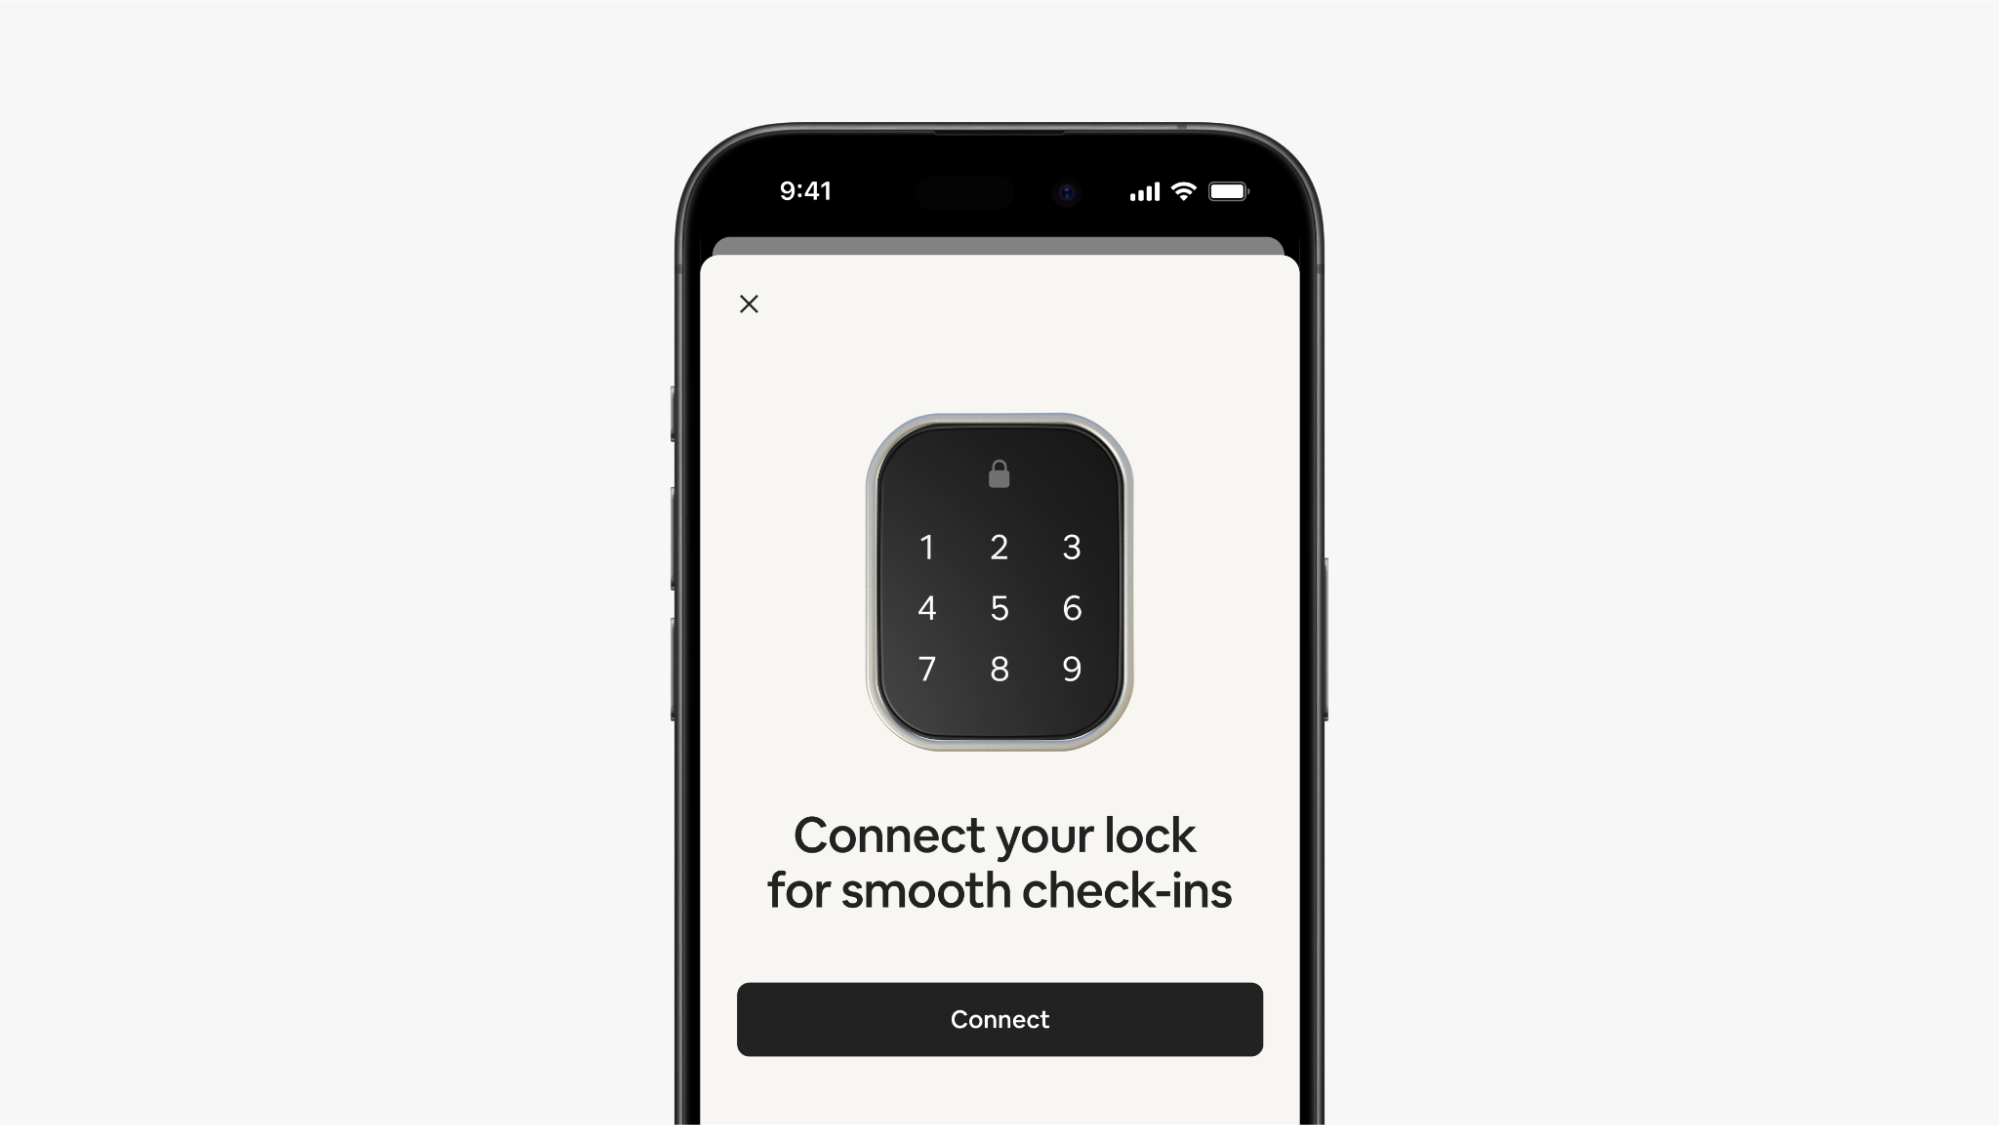 A screen in the Airbnb app shows a smart lock keypad with the numbers 1 to 9 above a Connect button.